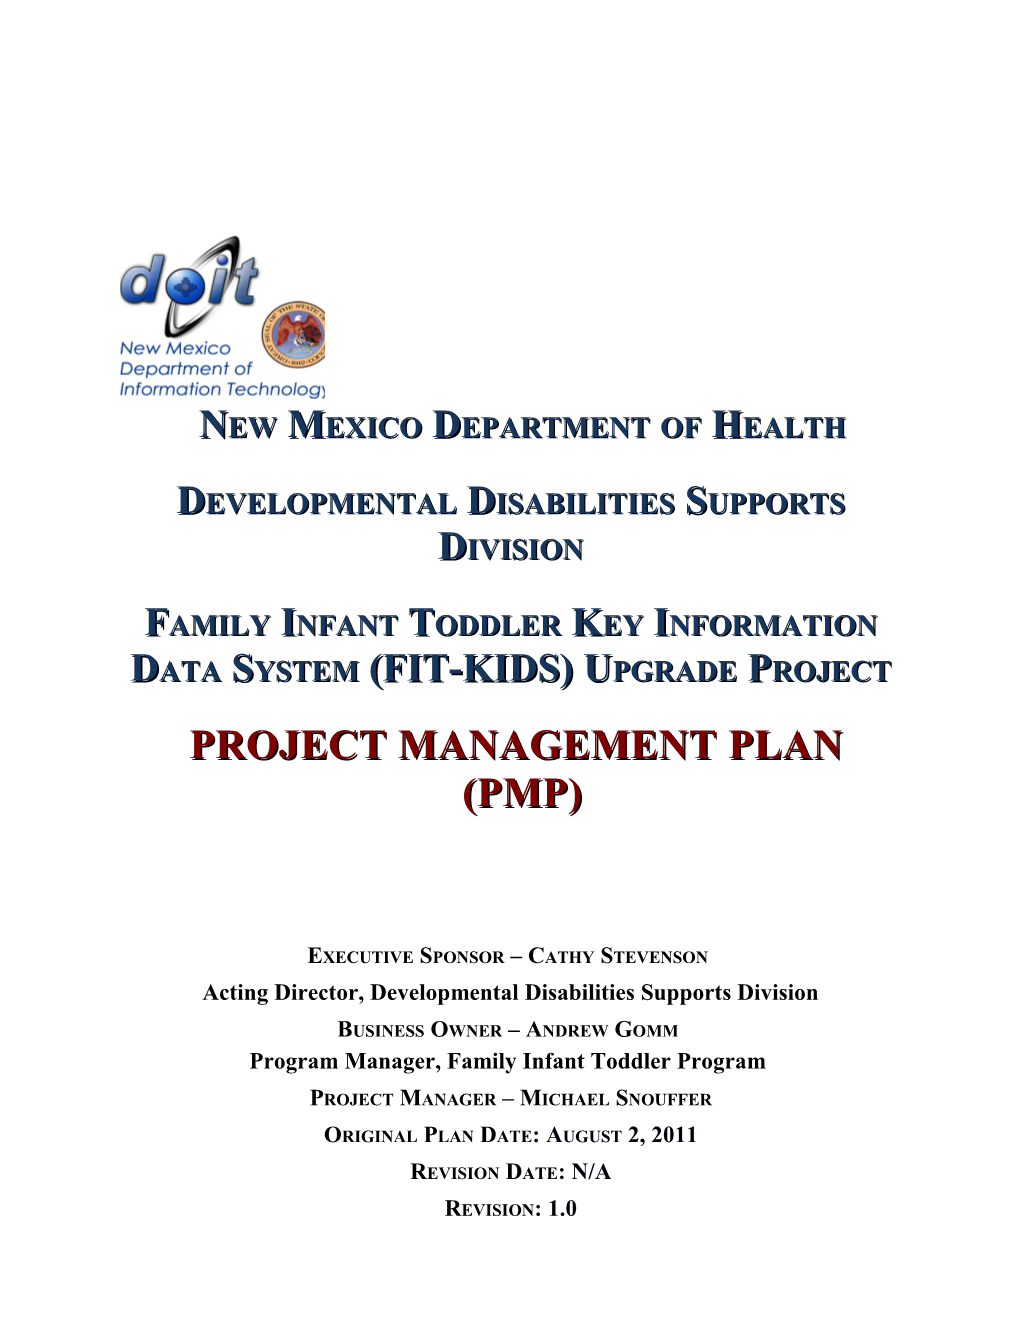 New Mexico Department of Health s2